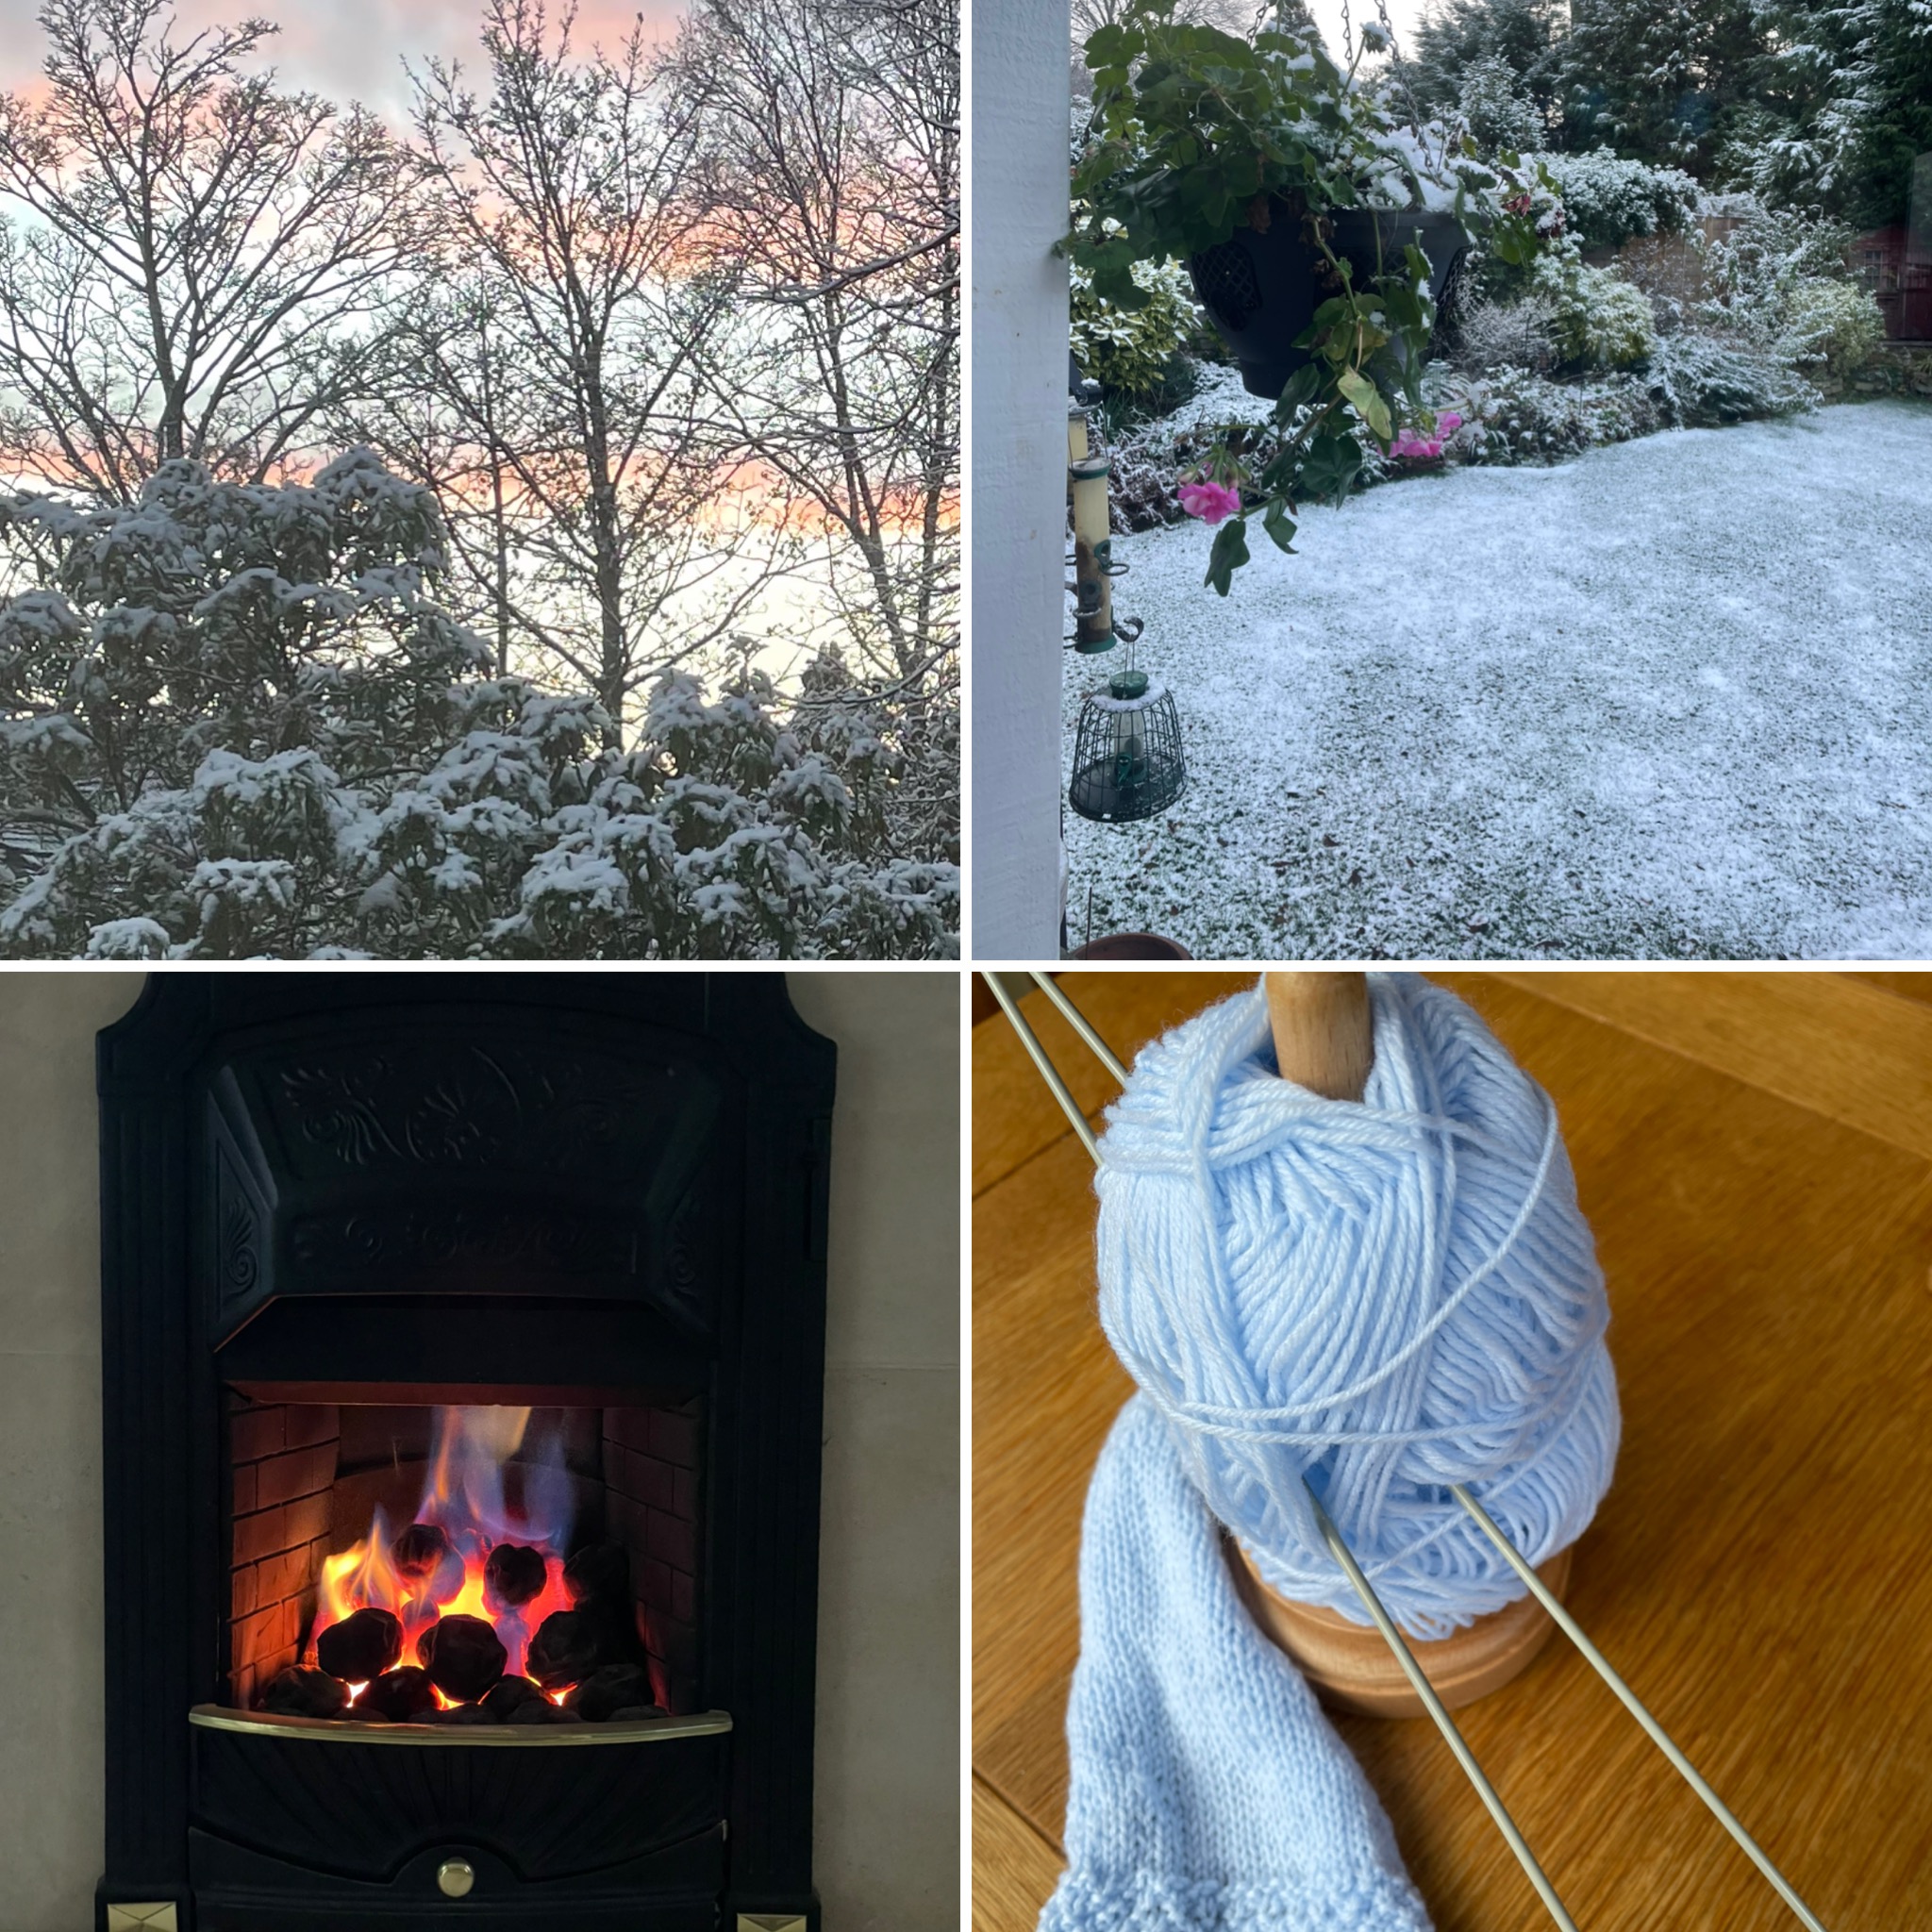 Fresh snow outside and cosy fireside and knitting indoors